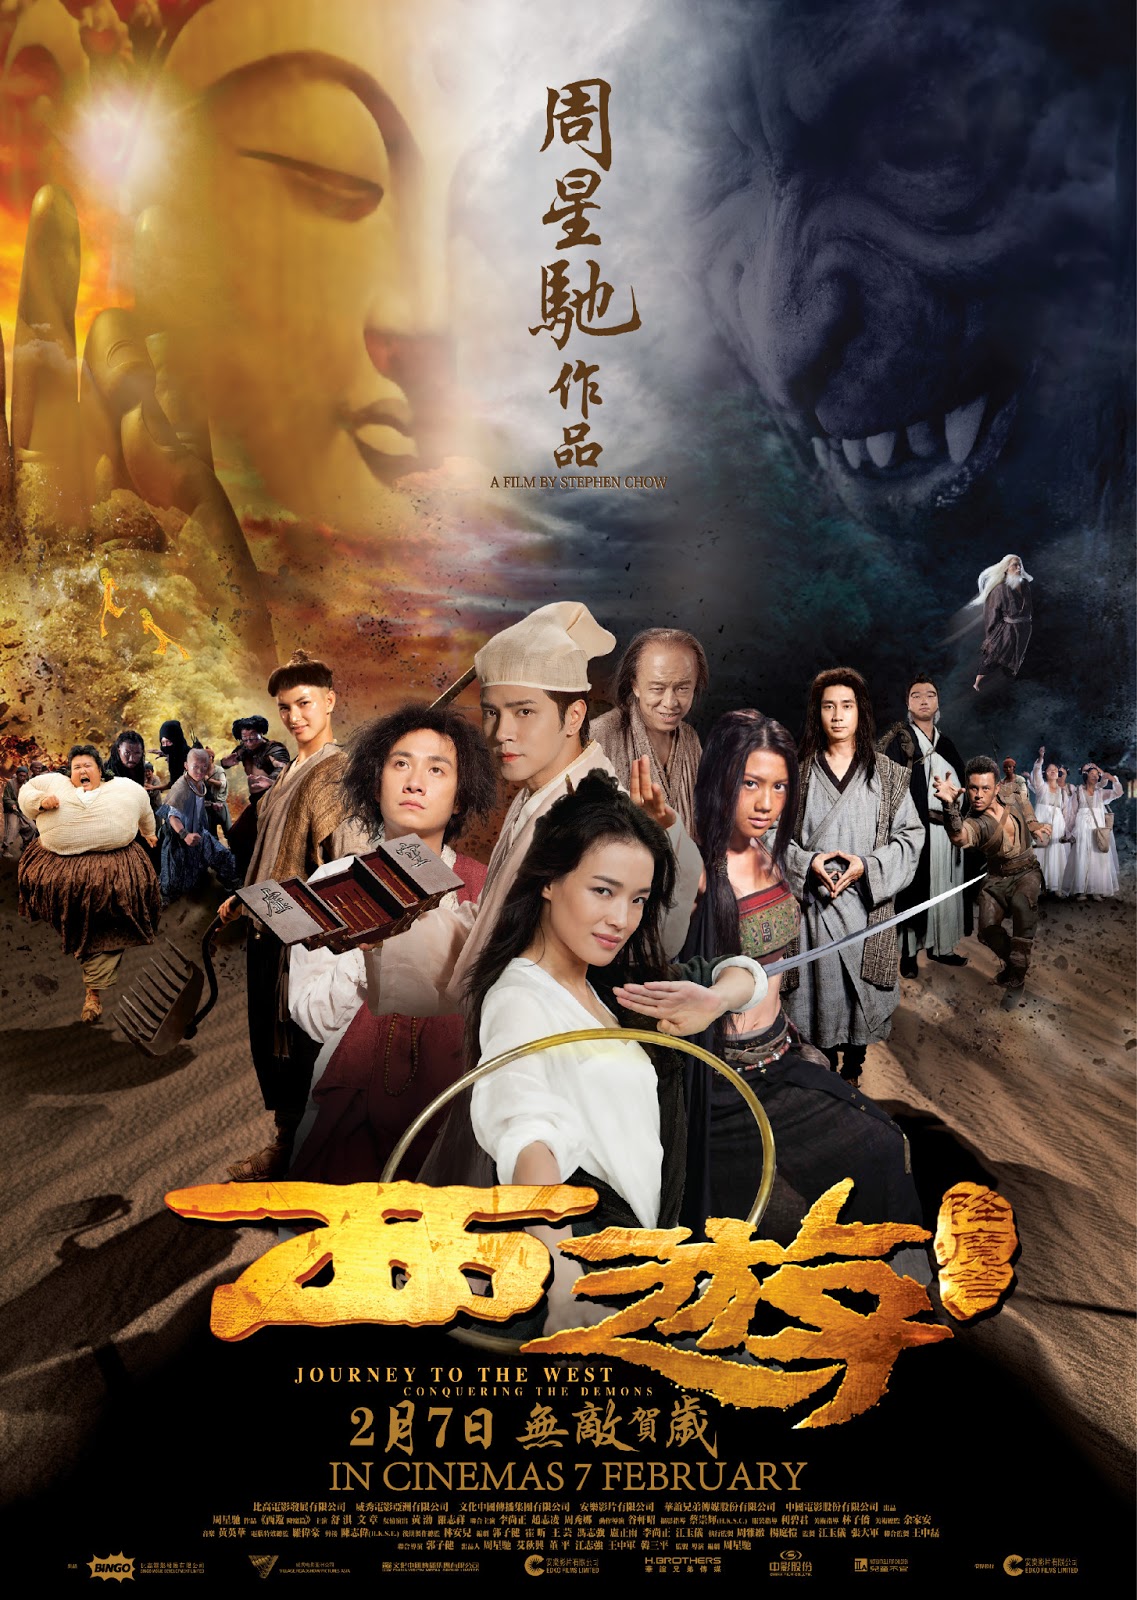 Journey to the West (cartel)